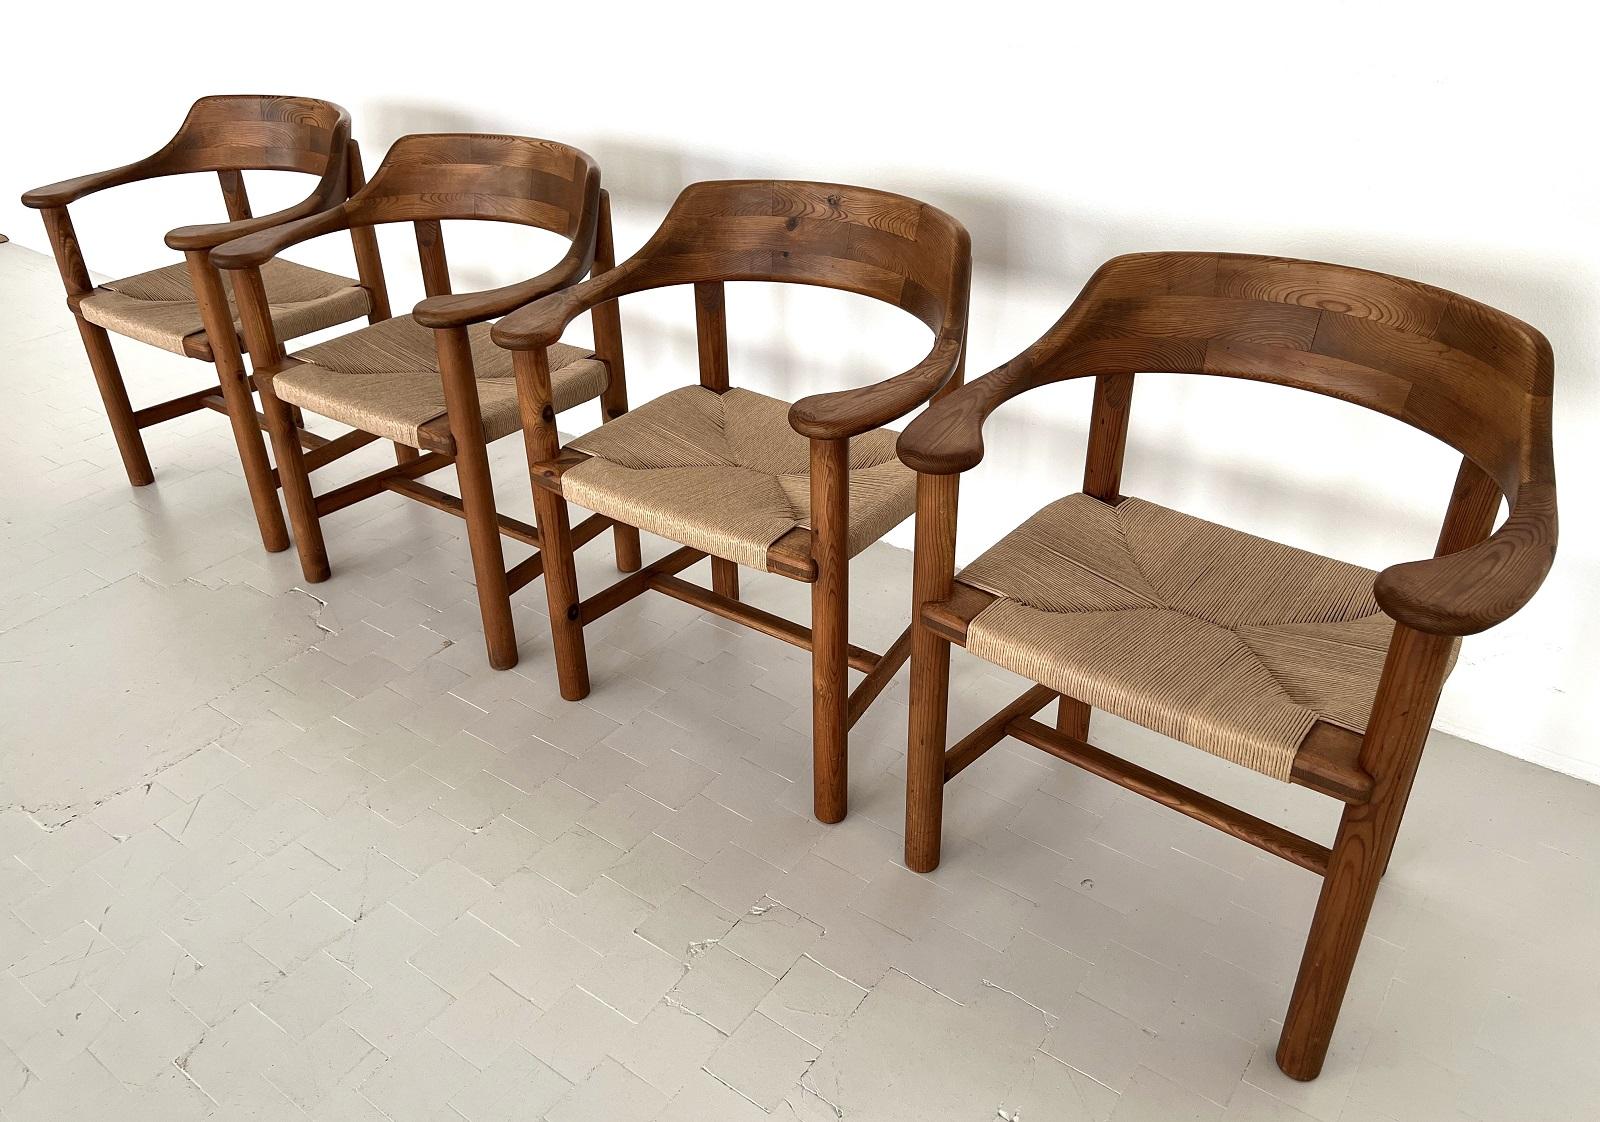 Rainer Daumiller Dining Chairs in Pine and New Paper Cord, 1970s For Sale 2